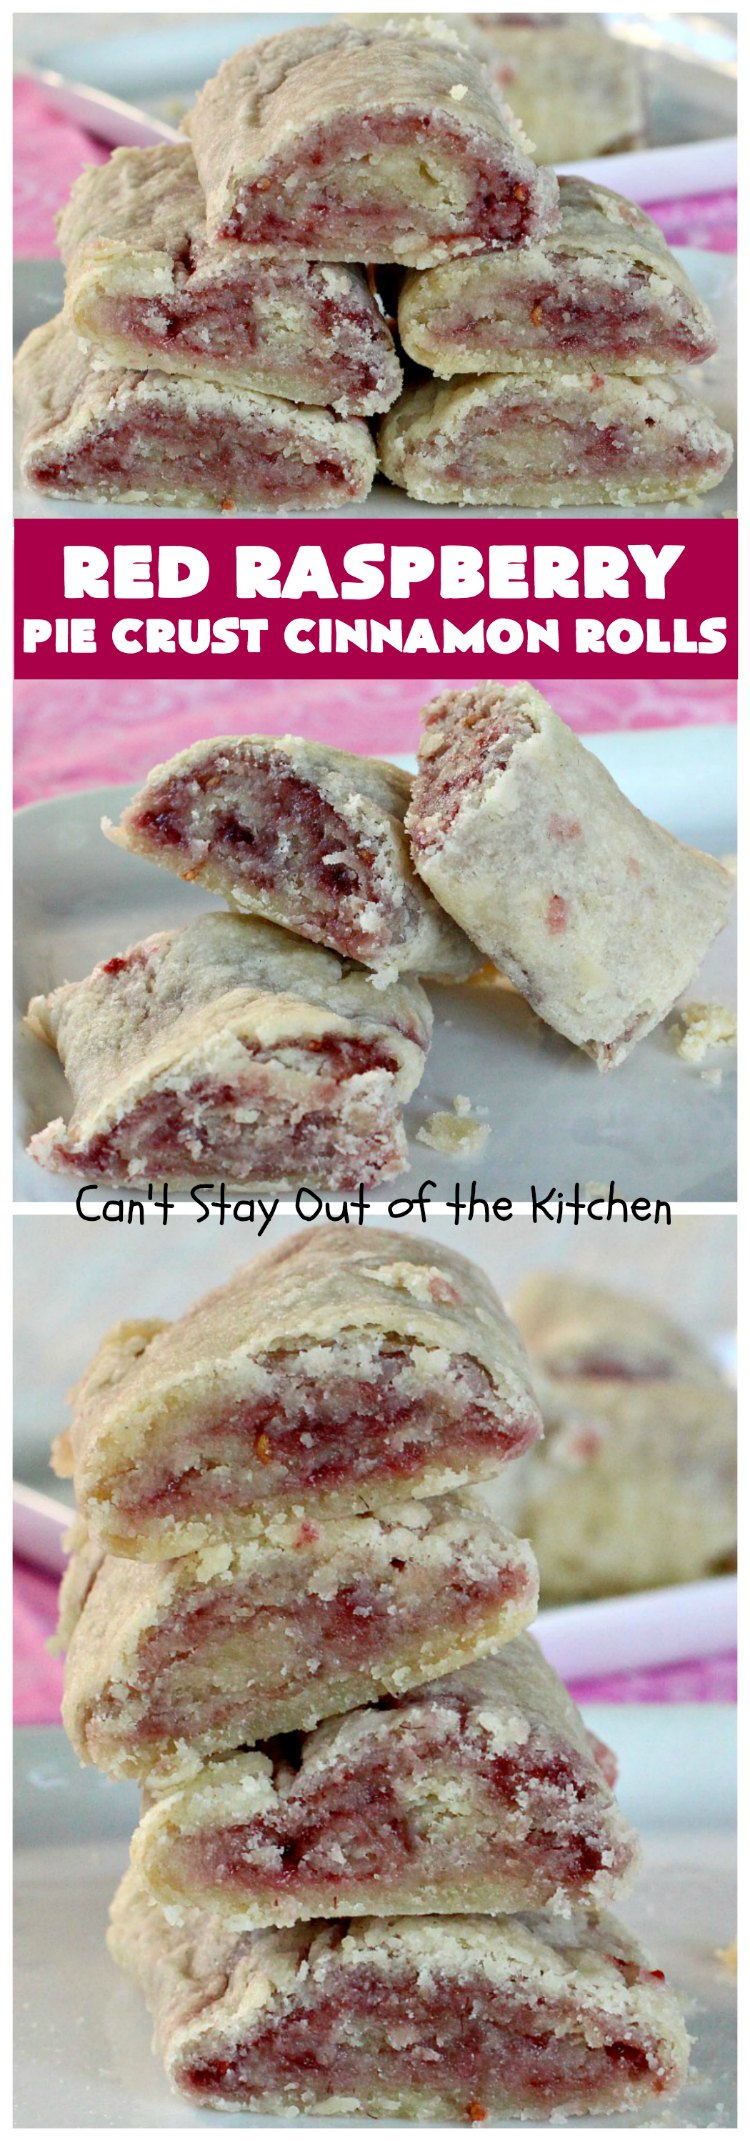 Red Raspberry Pie Crust Cinnamon Rolls | Can't Stay Out of the Kitchen | These #CinnamonRolls are awesome! My brothers and I would fight over them growing up. Homemade Pie Crust is filled with #RedRaspberryJam & sprinkled with cinnamon & sugar. These treats just dissolve in your mouth. Great for a #holiday #breakfast or for a snack any time--day or night! #Christmas  #RedRaspberryPieCrustCinnamonRolls #brunch #HolidayBreakfast